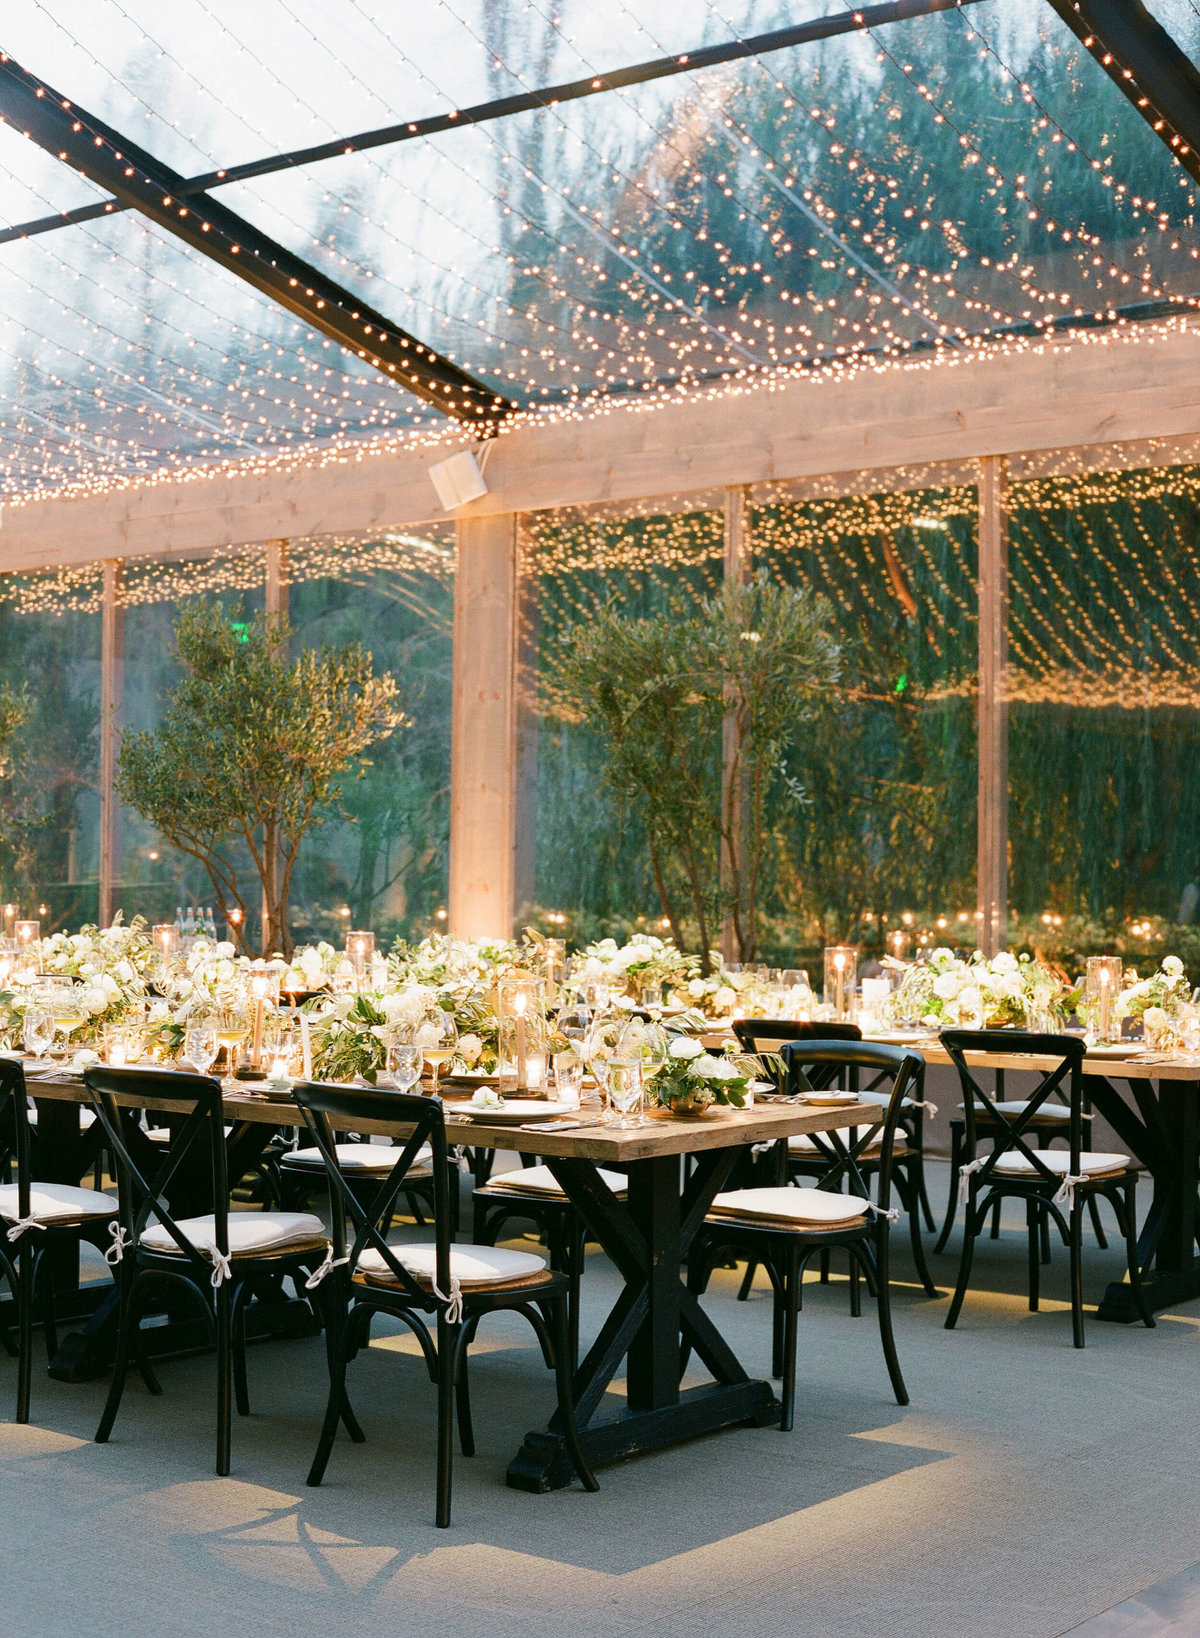 91-KTMerry-weddings-clear-tent-Meadowood-Napa-Valley